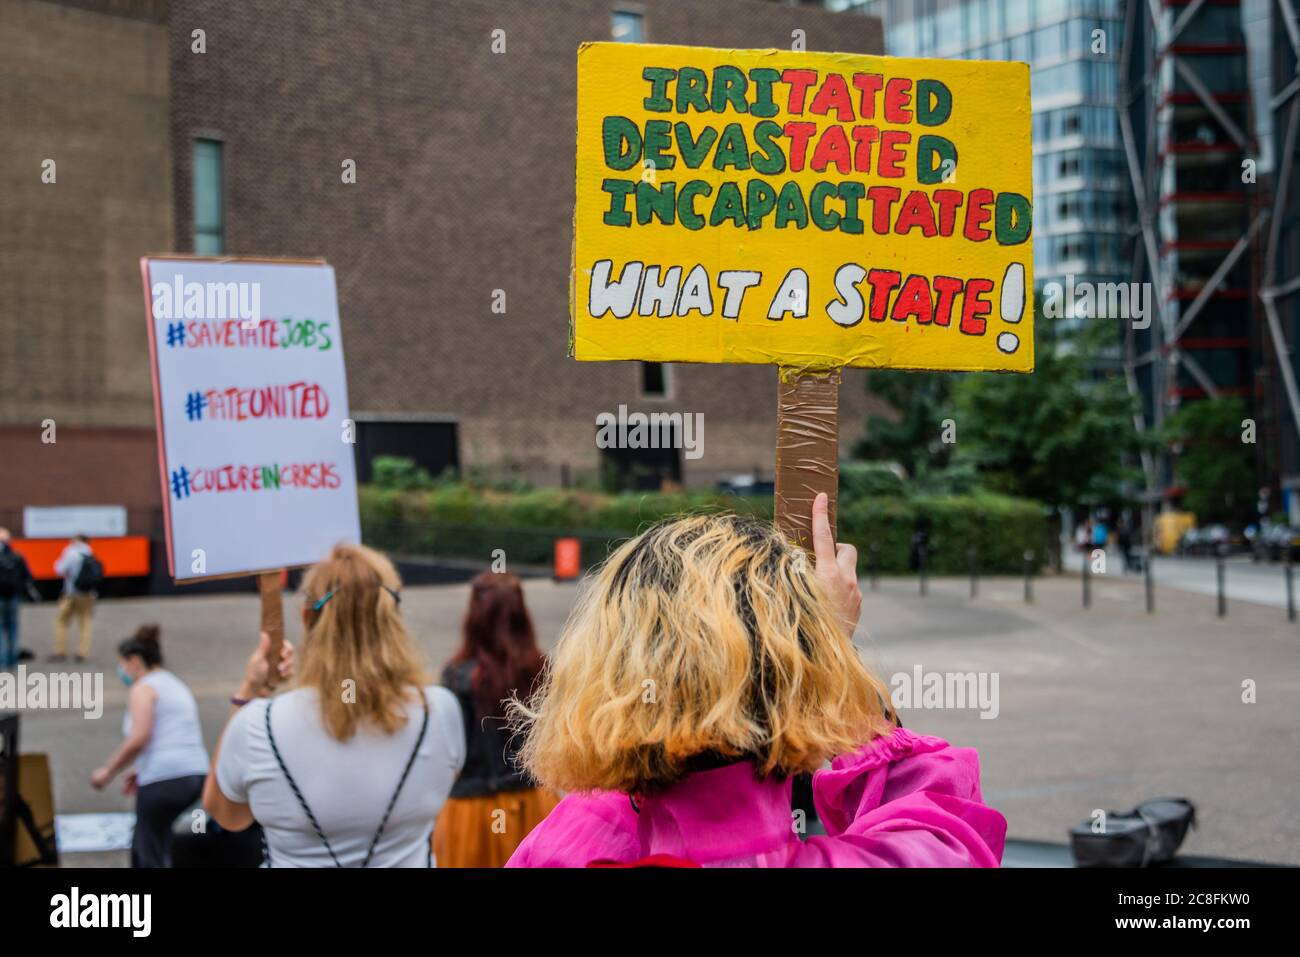 London, UK. 24th July, 2020. Protestors outside because the Tate has axed 300 jobs in the enterprises side of the business - The Tate Modern re-opens on Monday. Visitors are asked to follow guidance on social distancing etc, in line with advice from government following the easing of the lockdown. Credit: Guy Bell/Alamy Live News Stock Photo